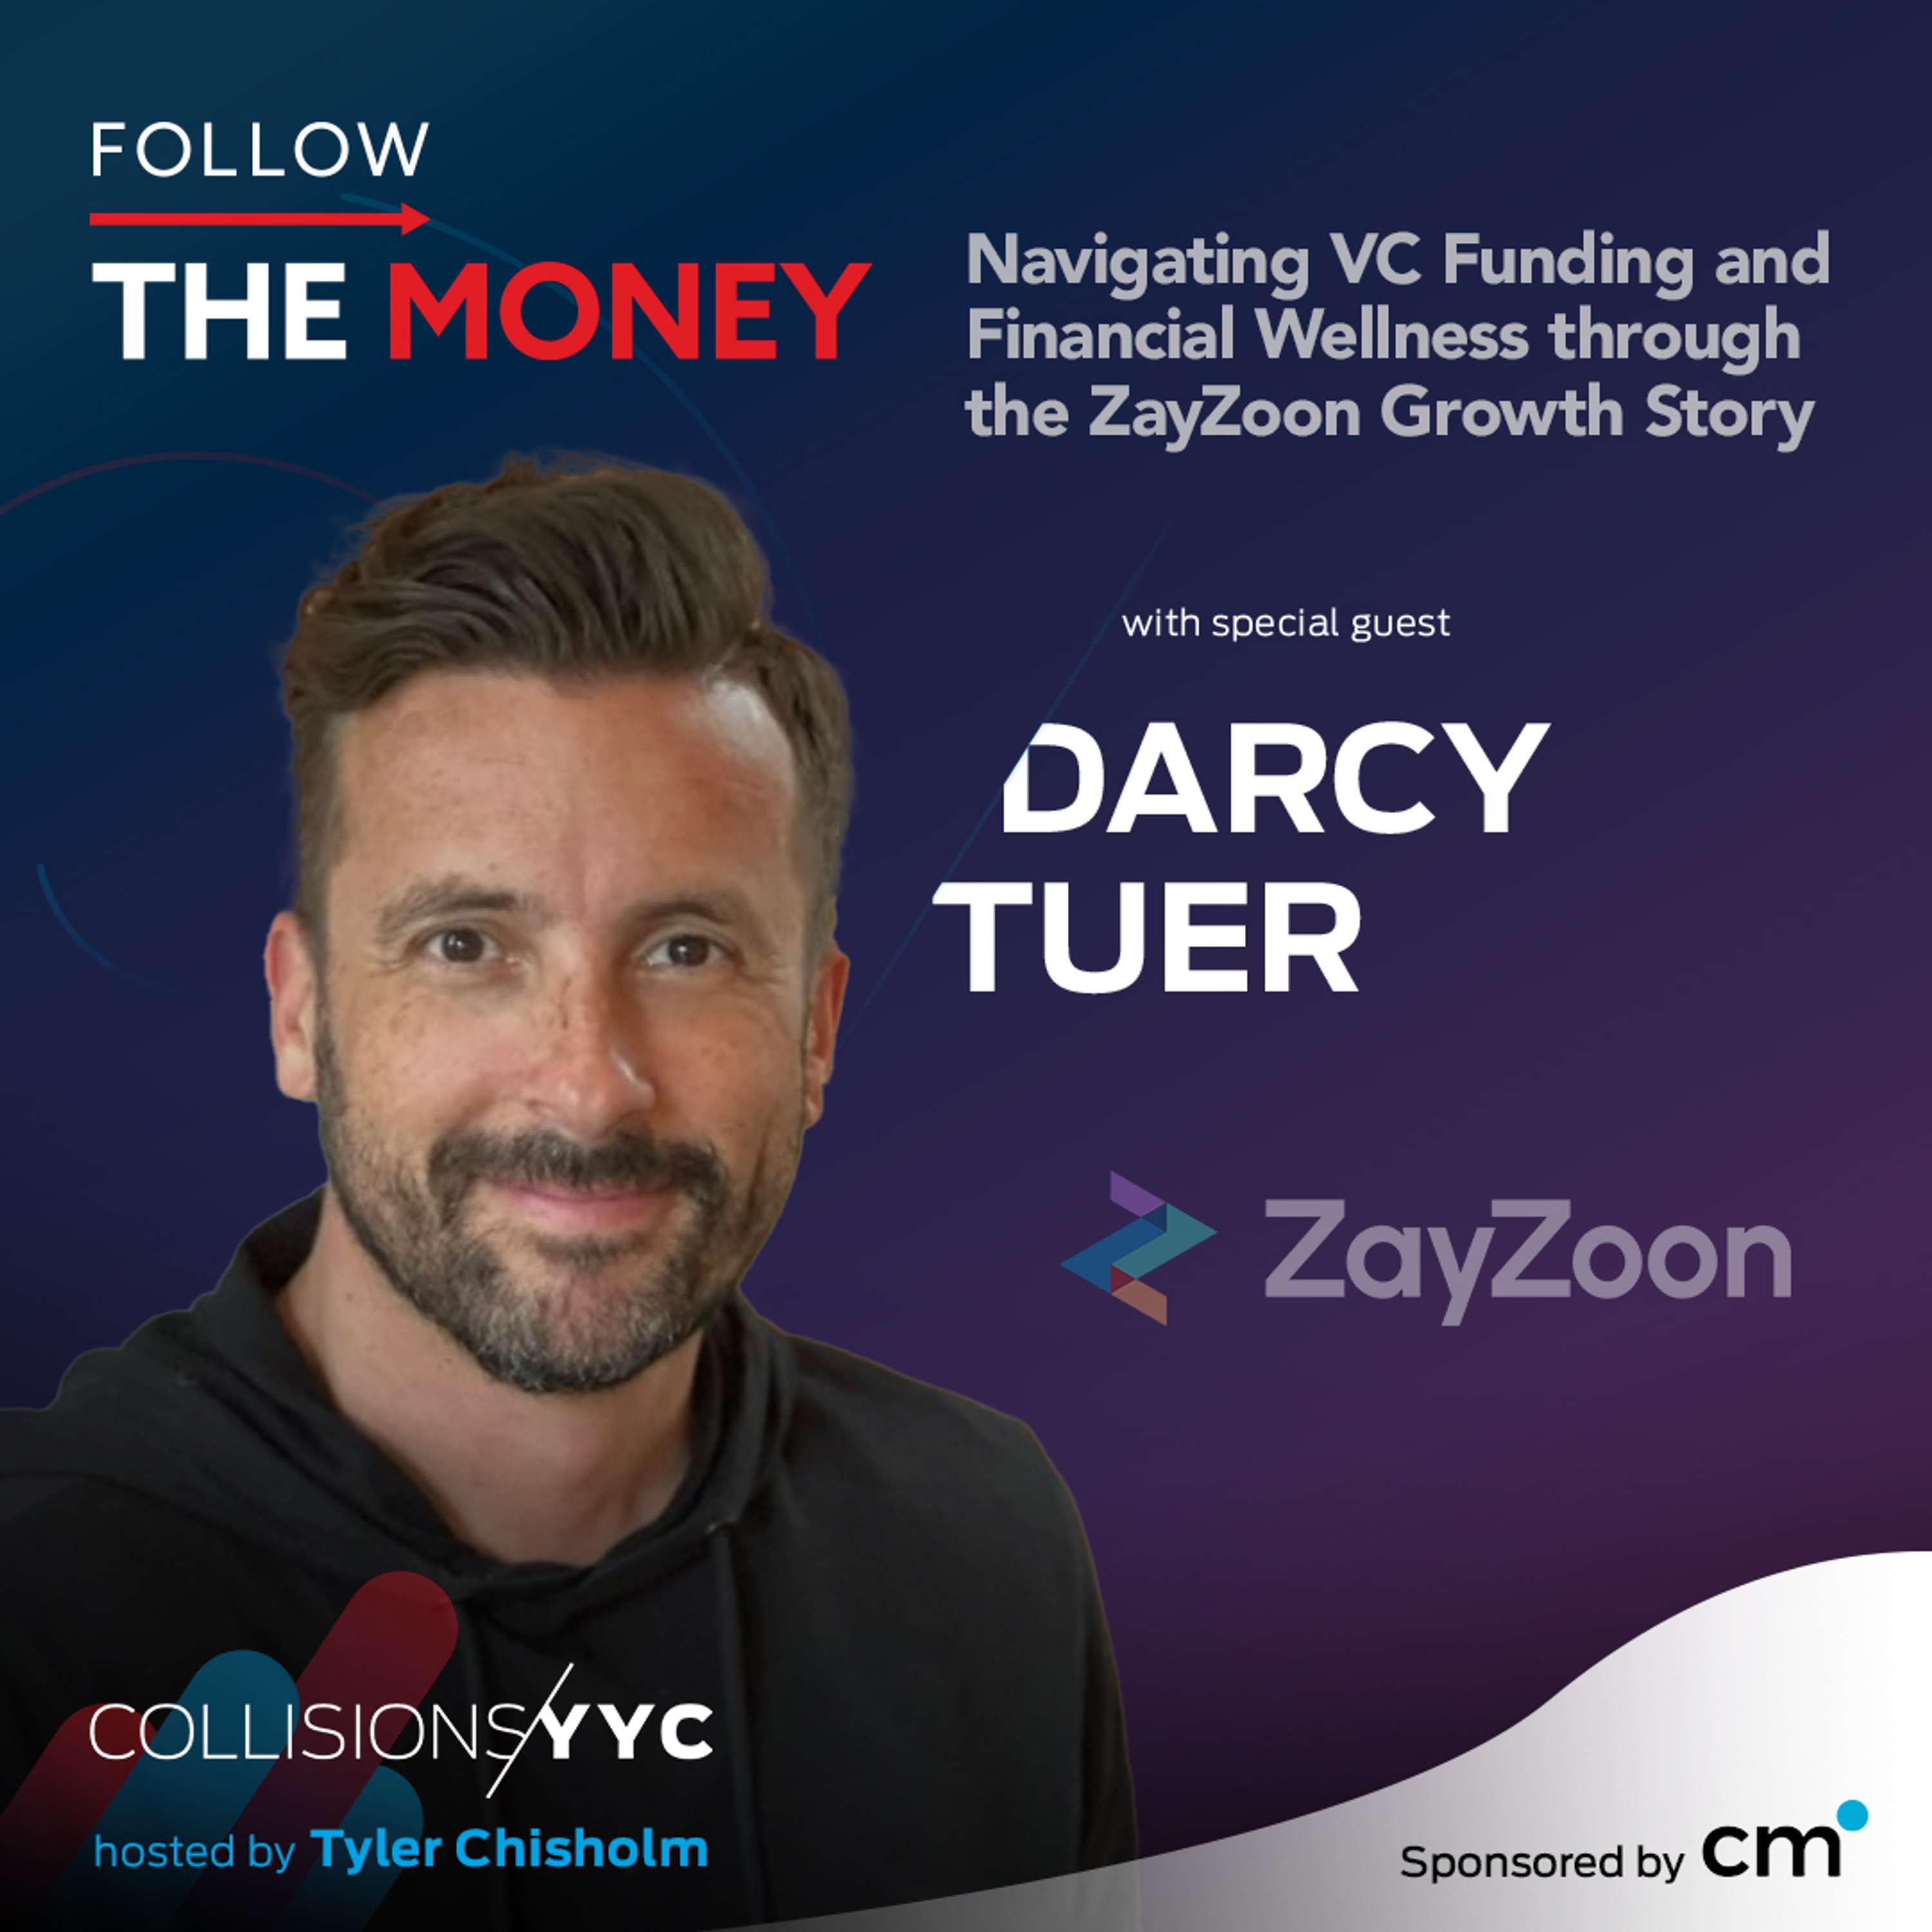 Darcy Tuer, Navigating VC Funding and Financial Wellness through the ZayZoon Growth Story